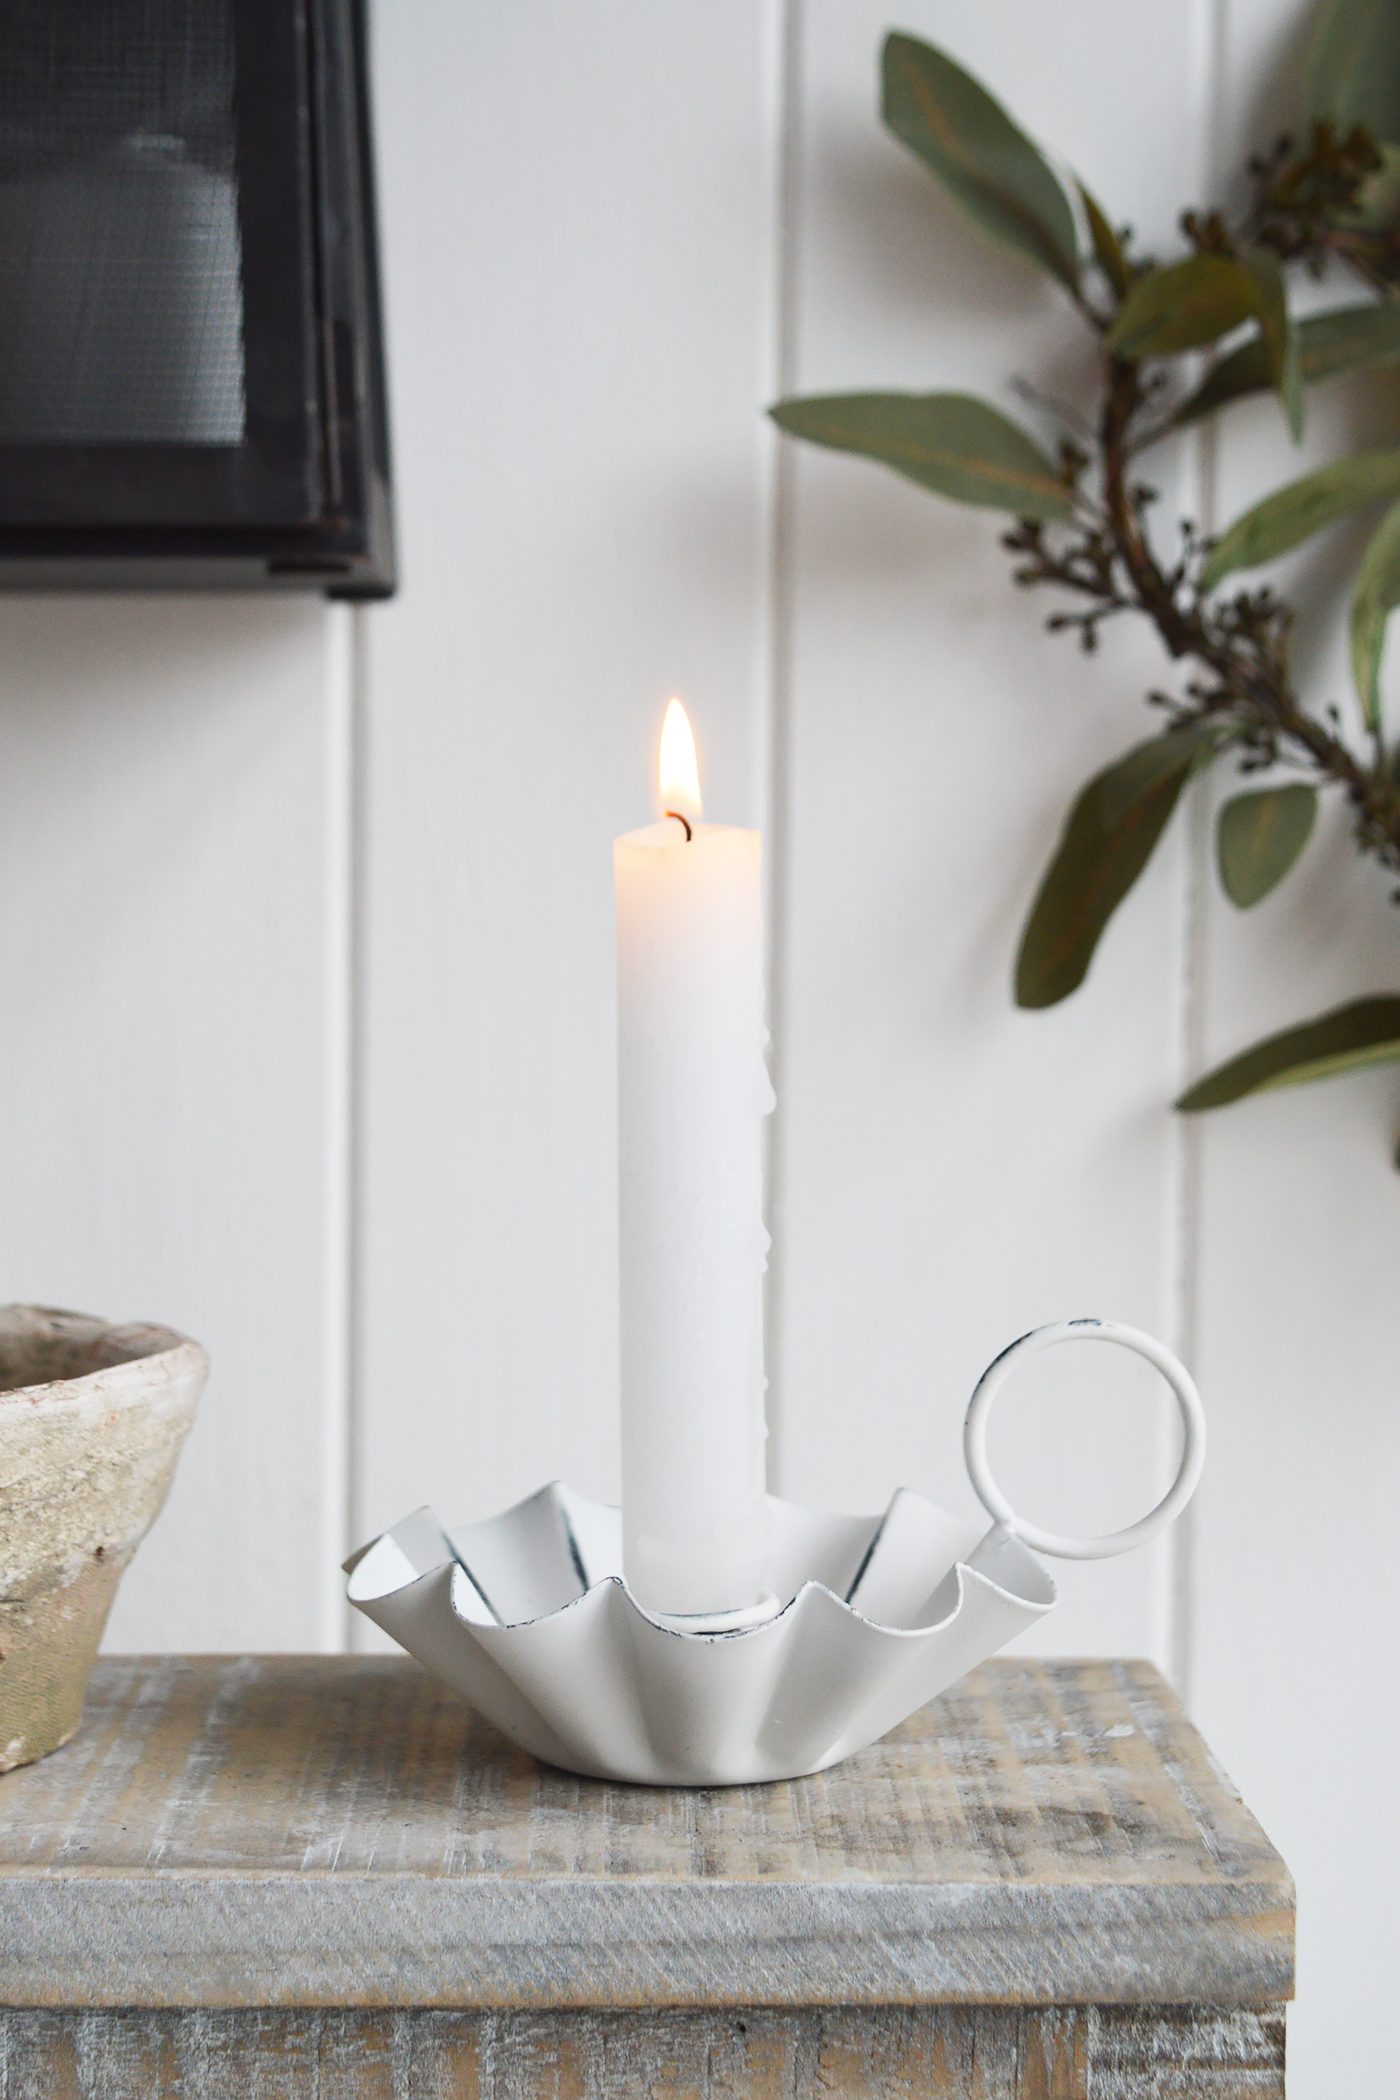 Cream Chamberstick candle holder - New England Coastal & Country Furniture and Home Decor for beautiful homes.